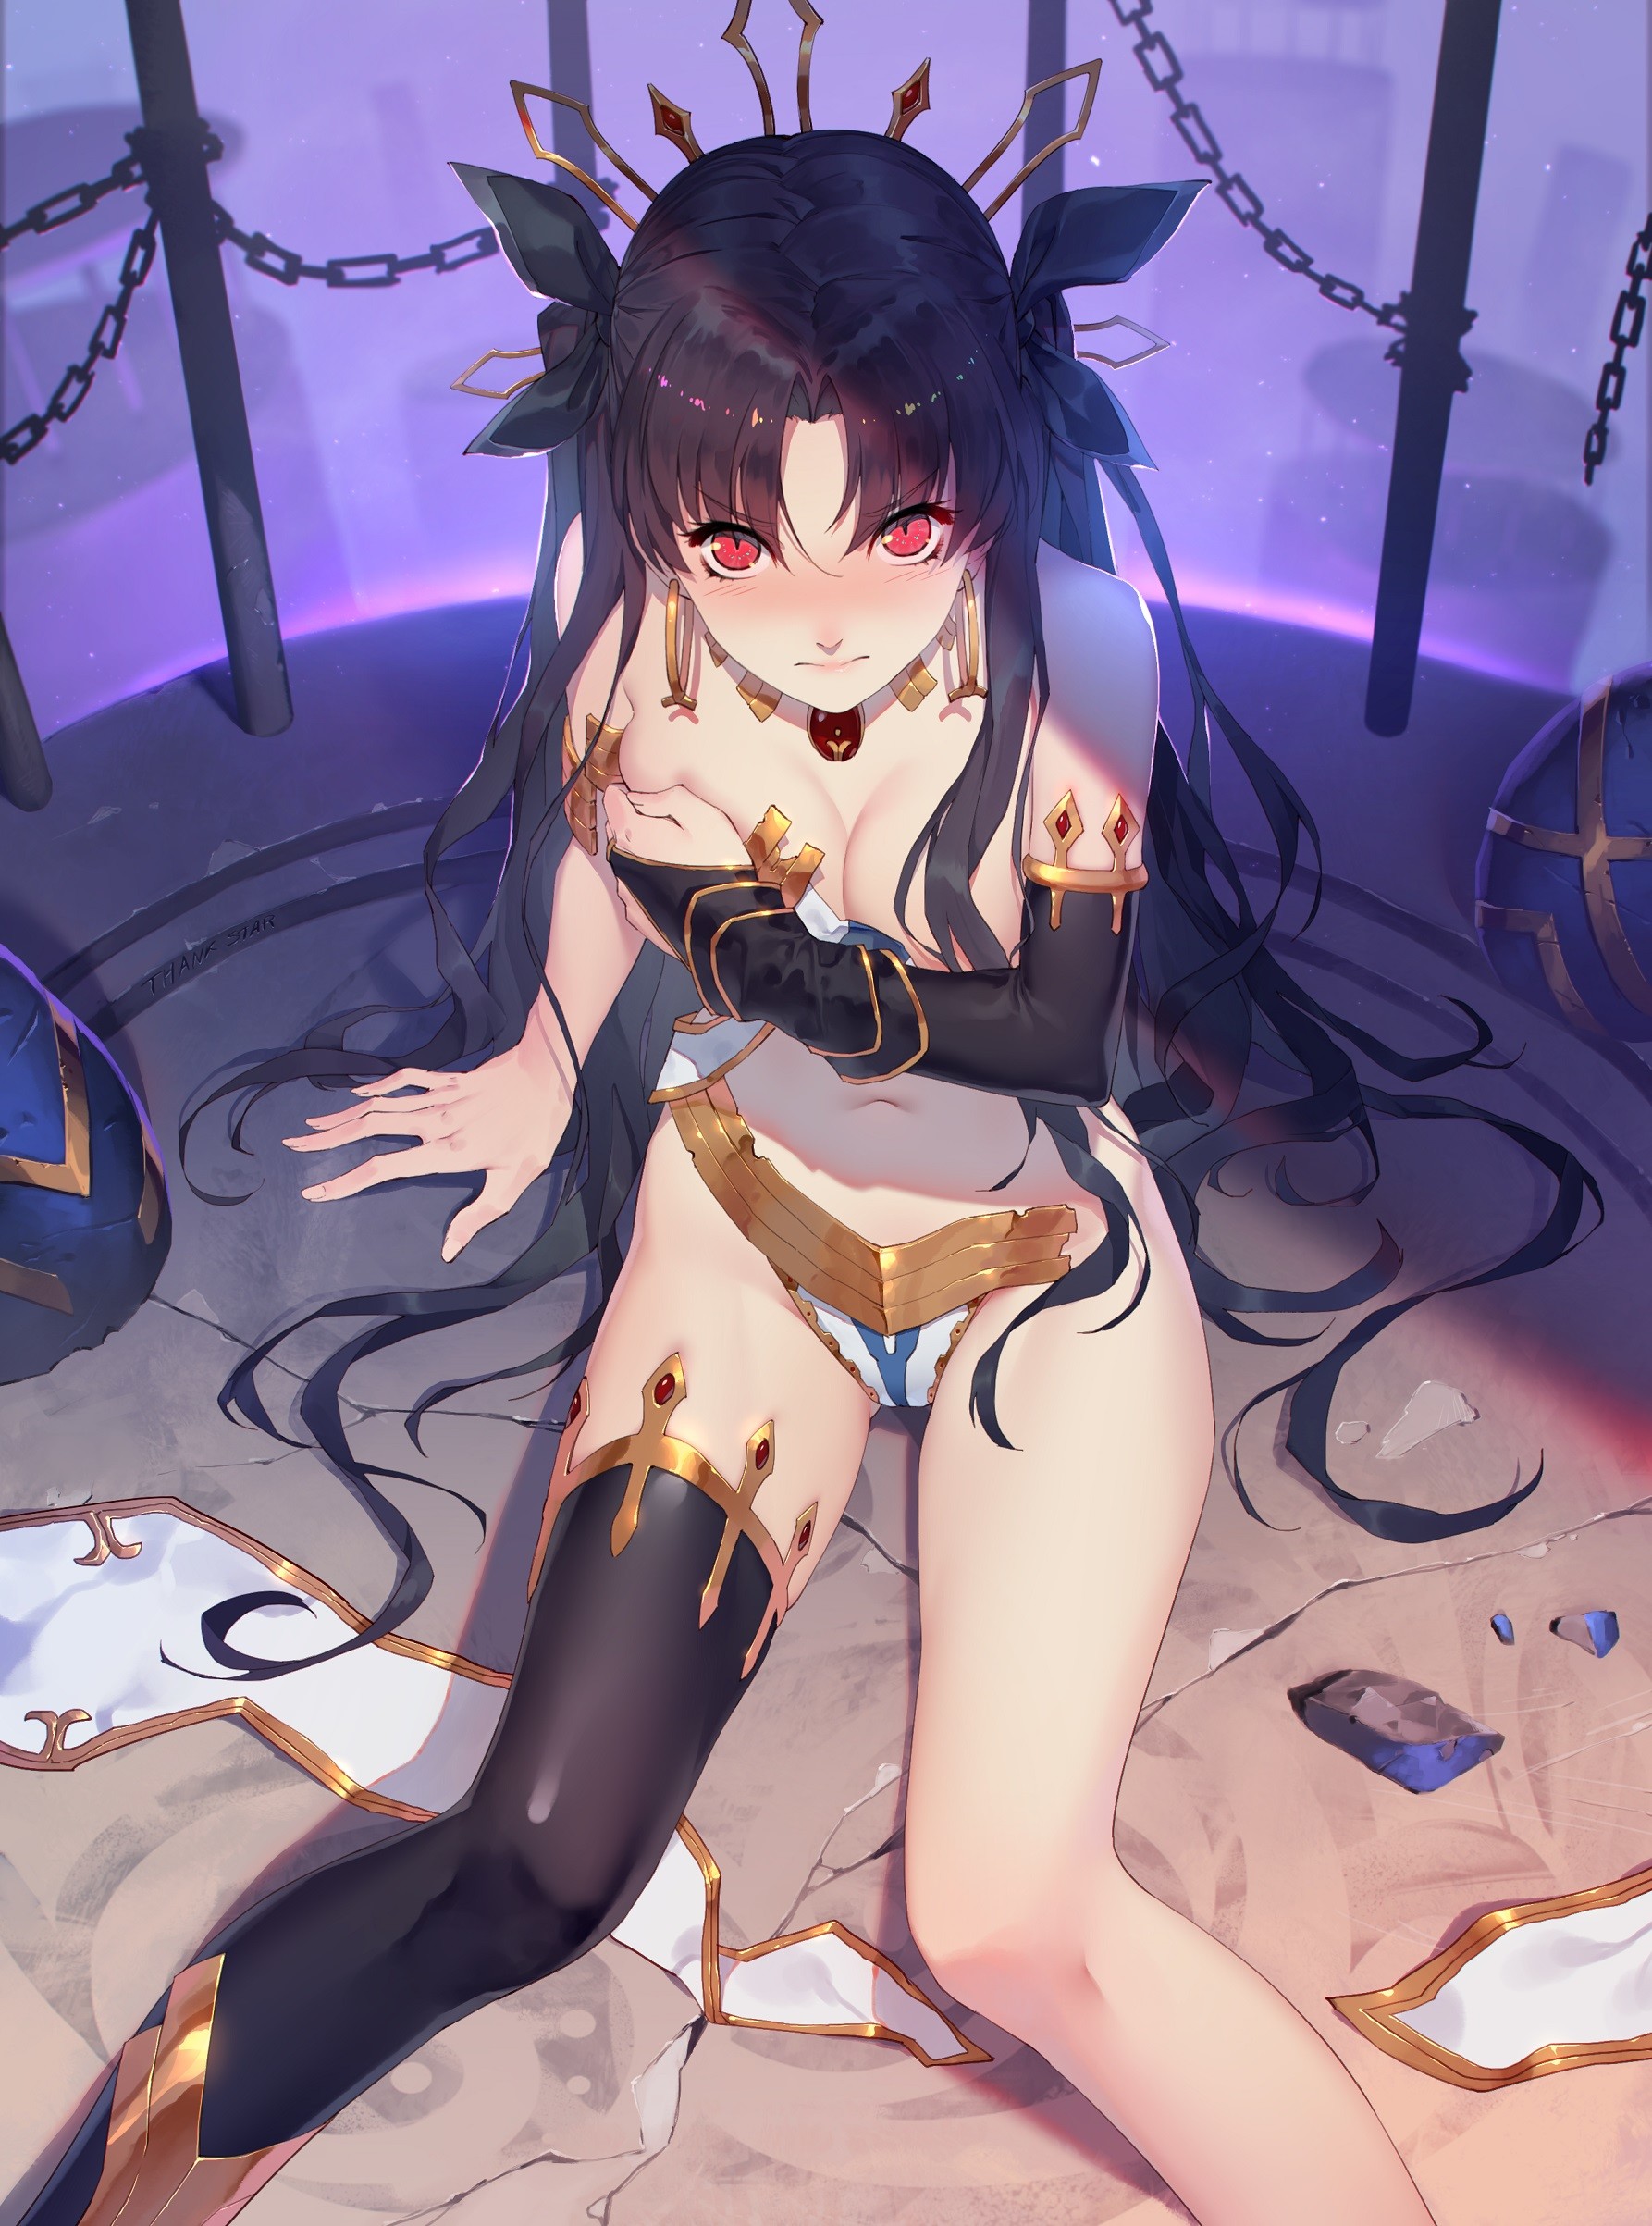 Anime 1786x2406 anime anime girls Ishtar (Fate/Grand Order) Fate/Grand Order Fate series Thankstar404 dark hair red eyes blushing covering boobs cleavage torn clothes thighs the gap no bra embarrassed 2D sitting twintails black hair long hair black ribbons high angle looking at viewer ecchi portrait display fan art belly button